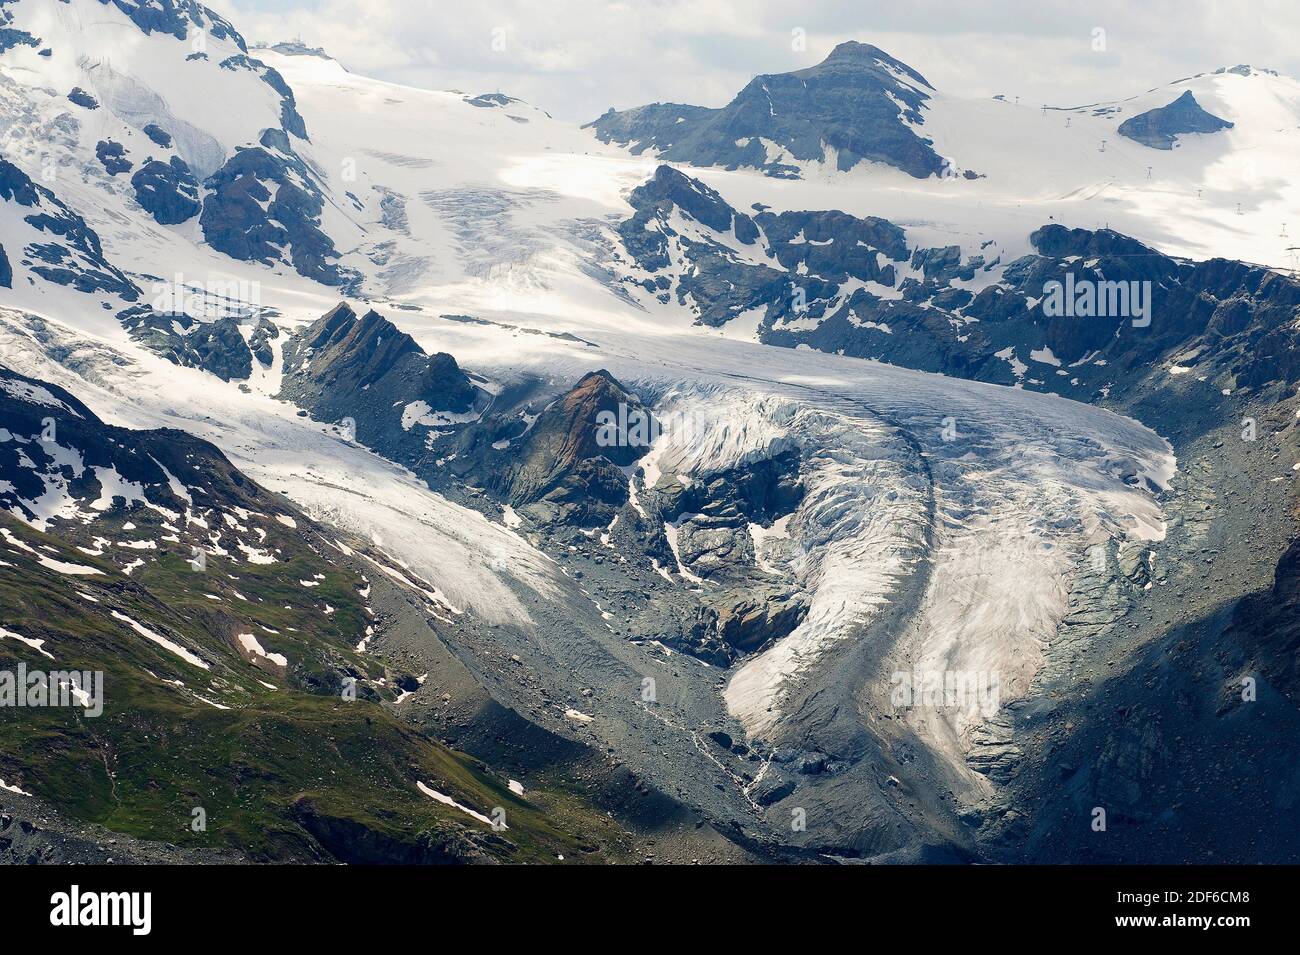 Gornergrat glacier with main and secondary glaciers, cirques, hanging valleys, aretes, horns, crevases and moraines. Alps, Switzerland. Stock Photo